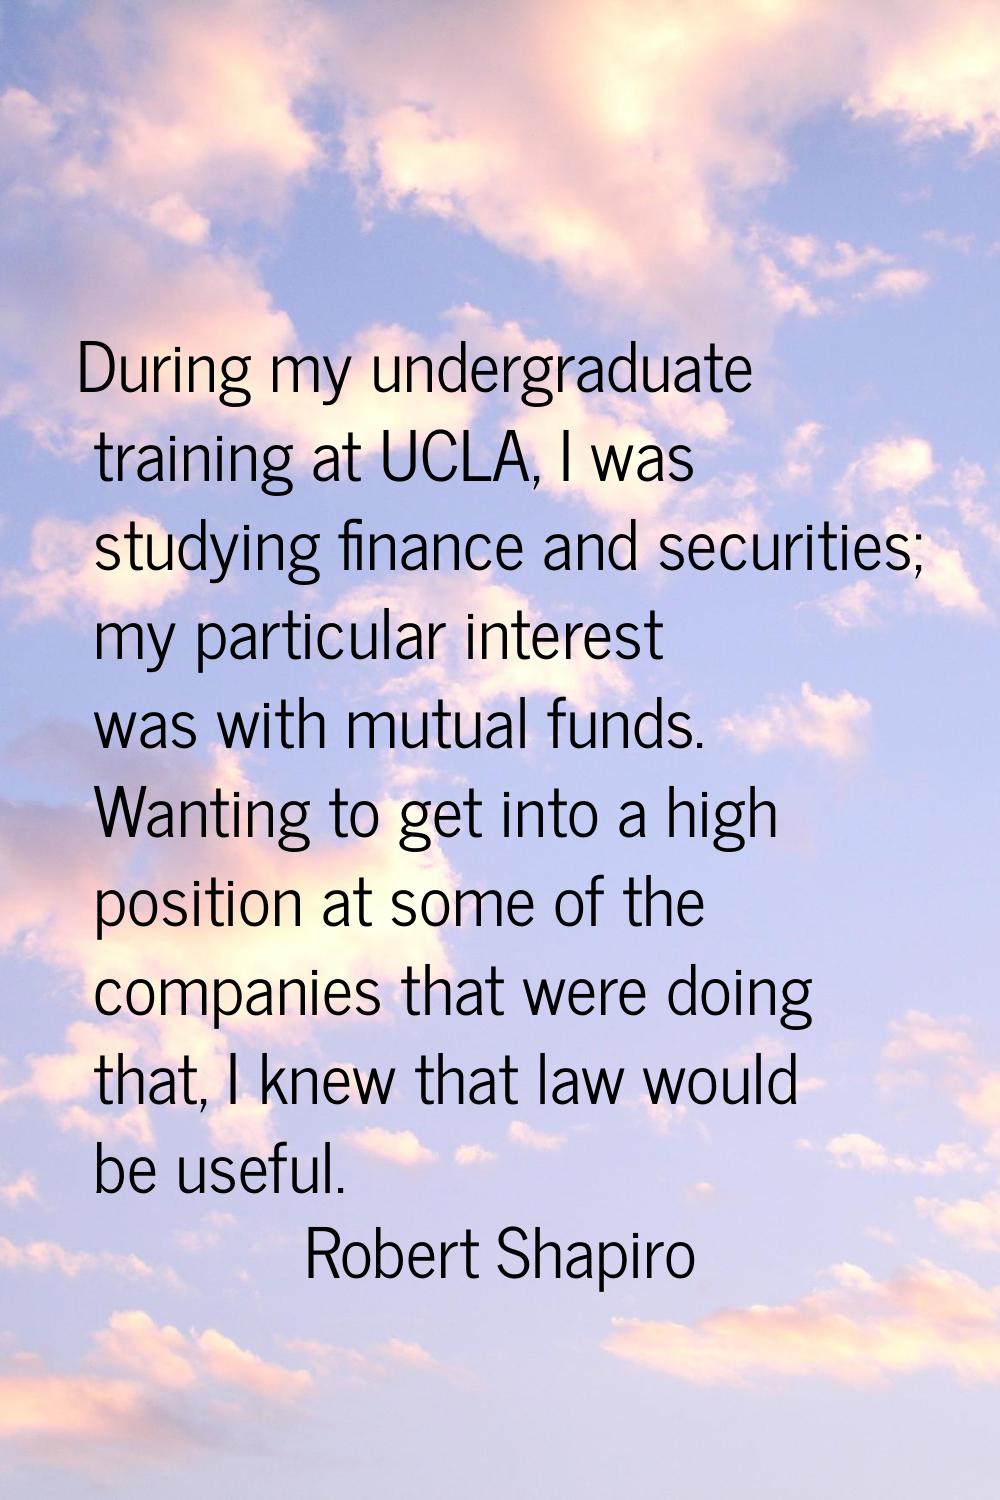 During my undergraduate training at UCLA, I was studying finance and securities; my particular inte